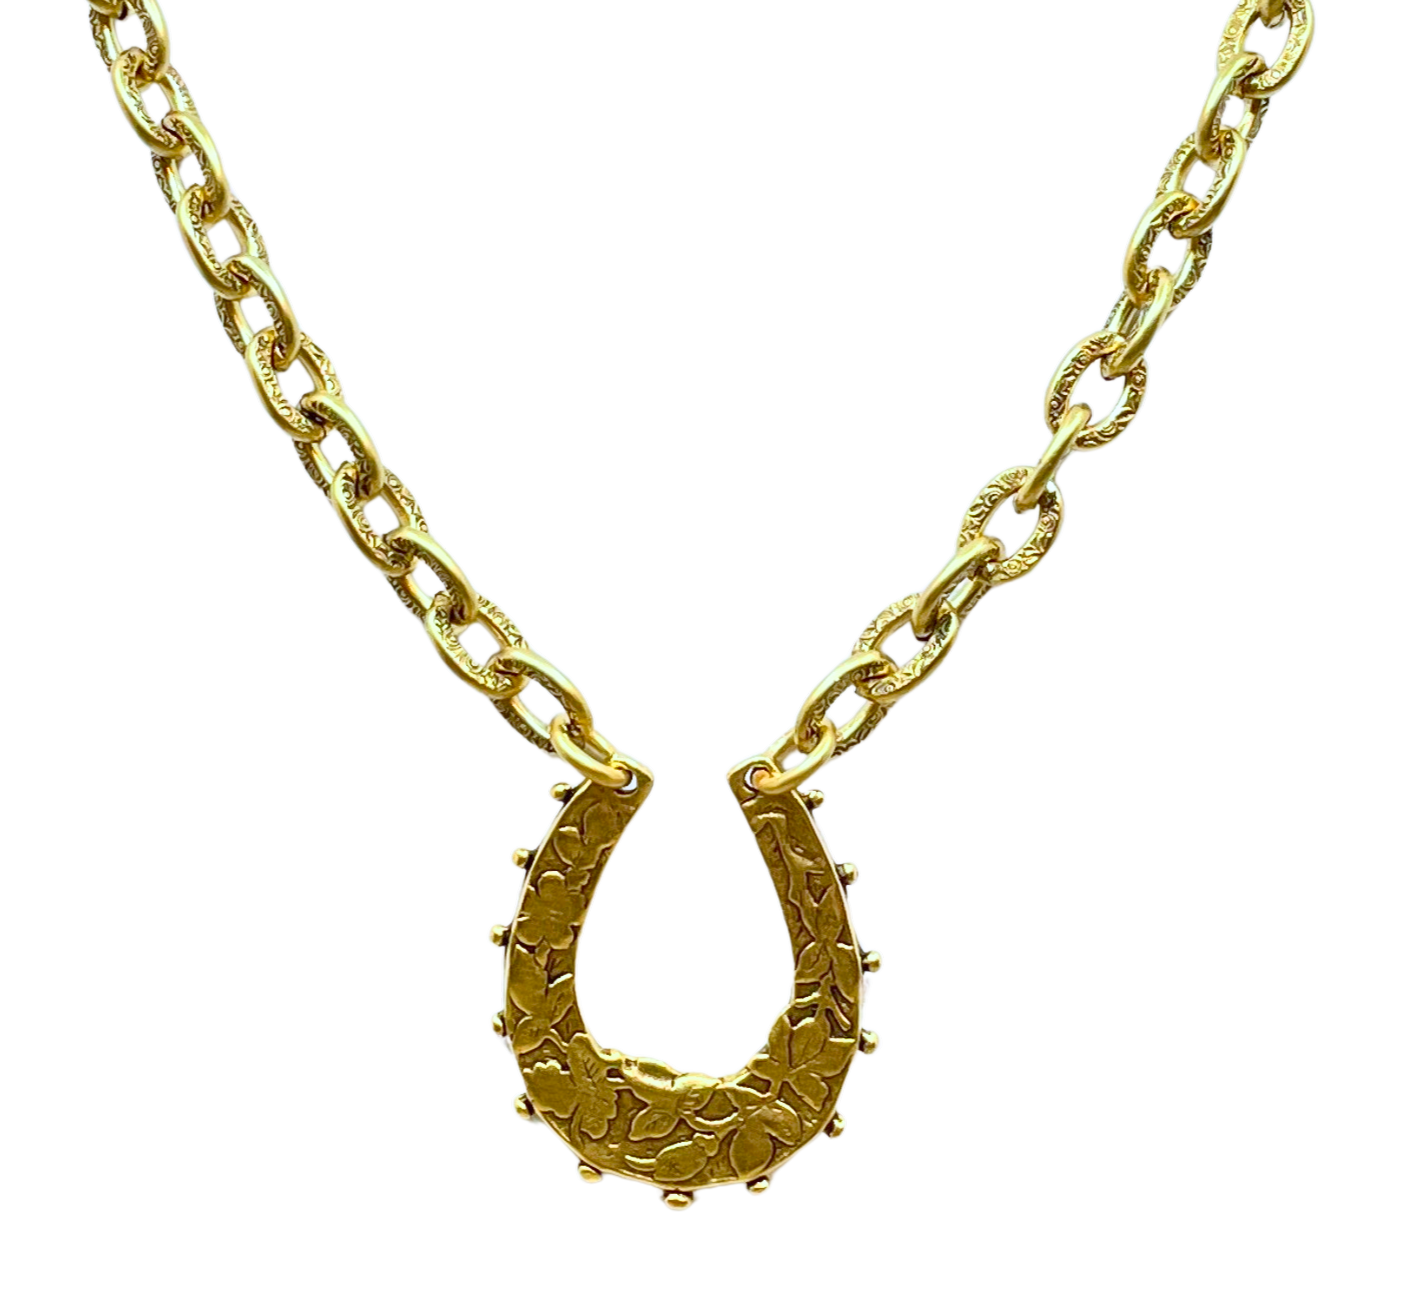 Vintage Reproduction Gold Plated 18" Chain with Horseshoe Pendant